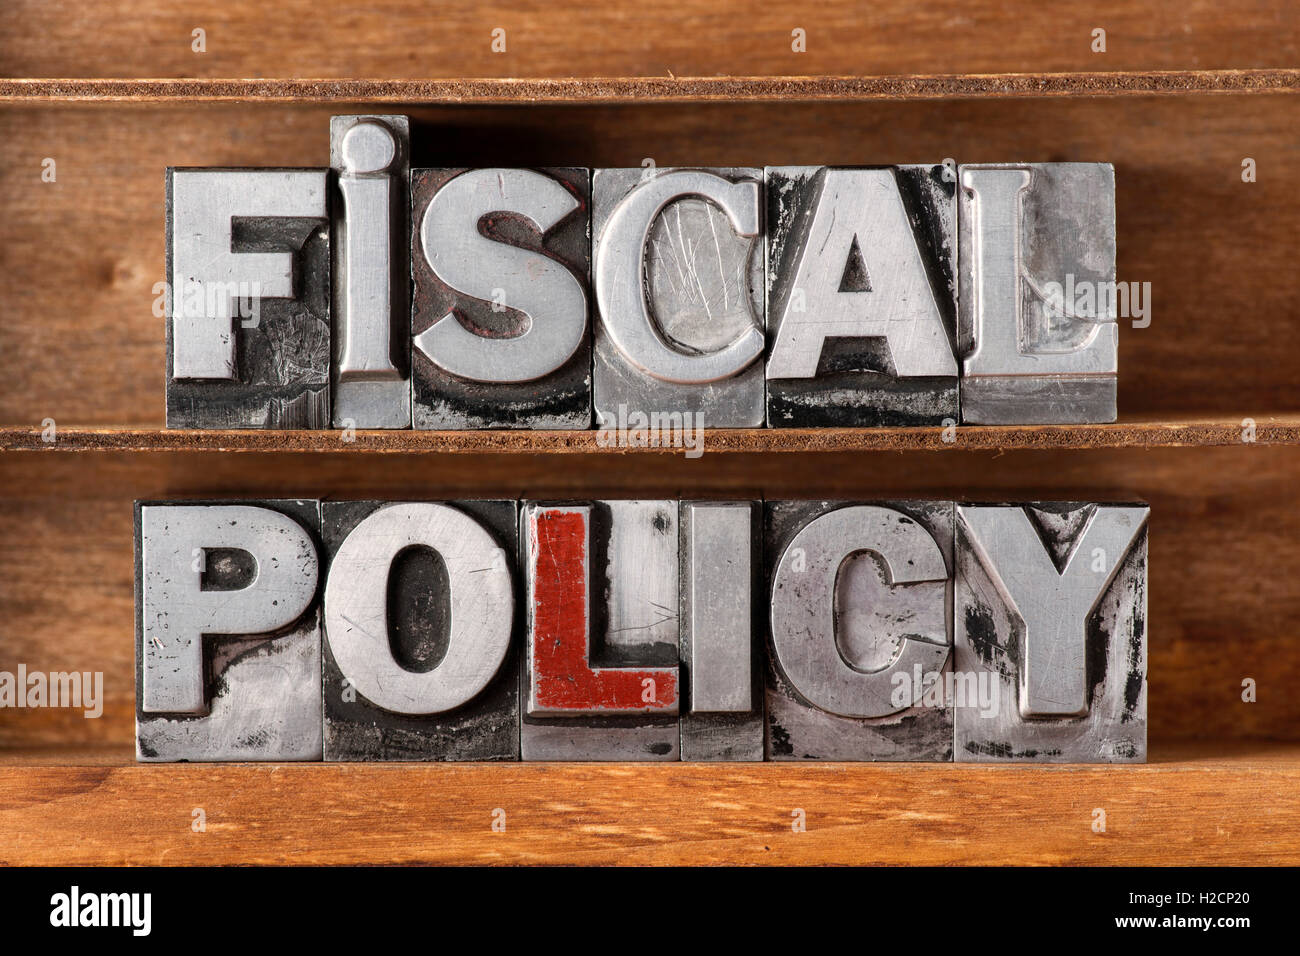 fiscal policy phrase made from metallic letterpress type on wooden tray Stock Photo